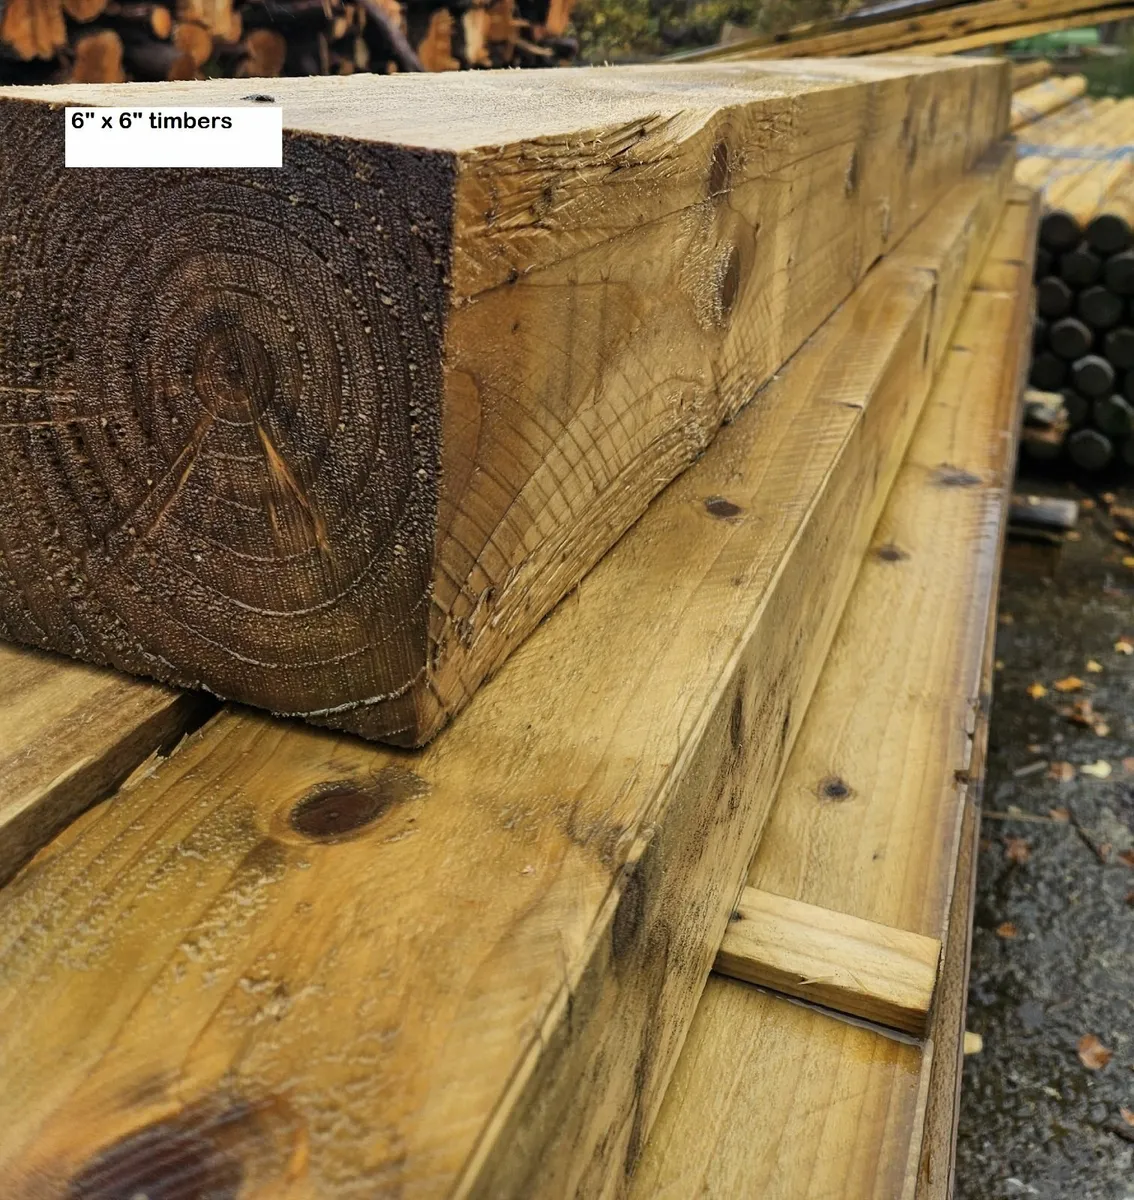 Treated Timber Products - Image 1